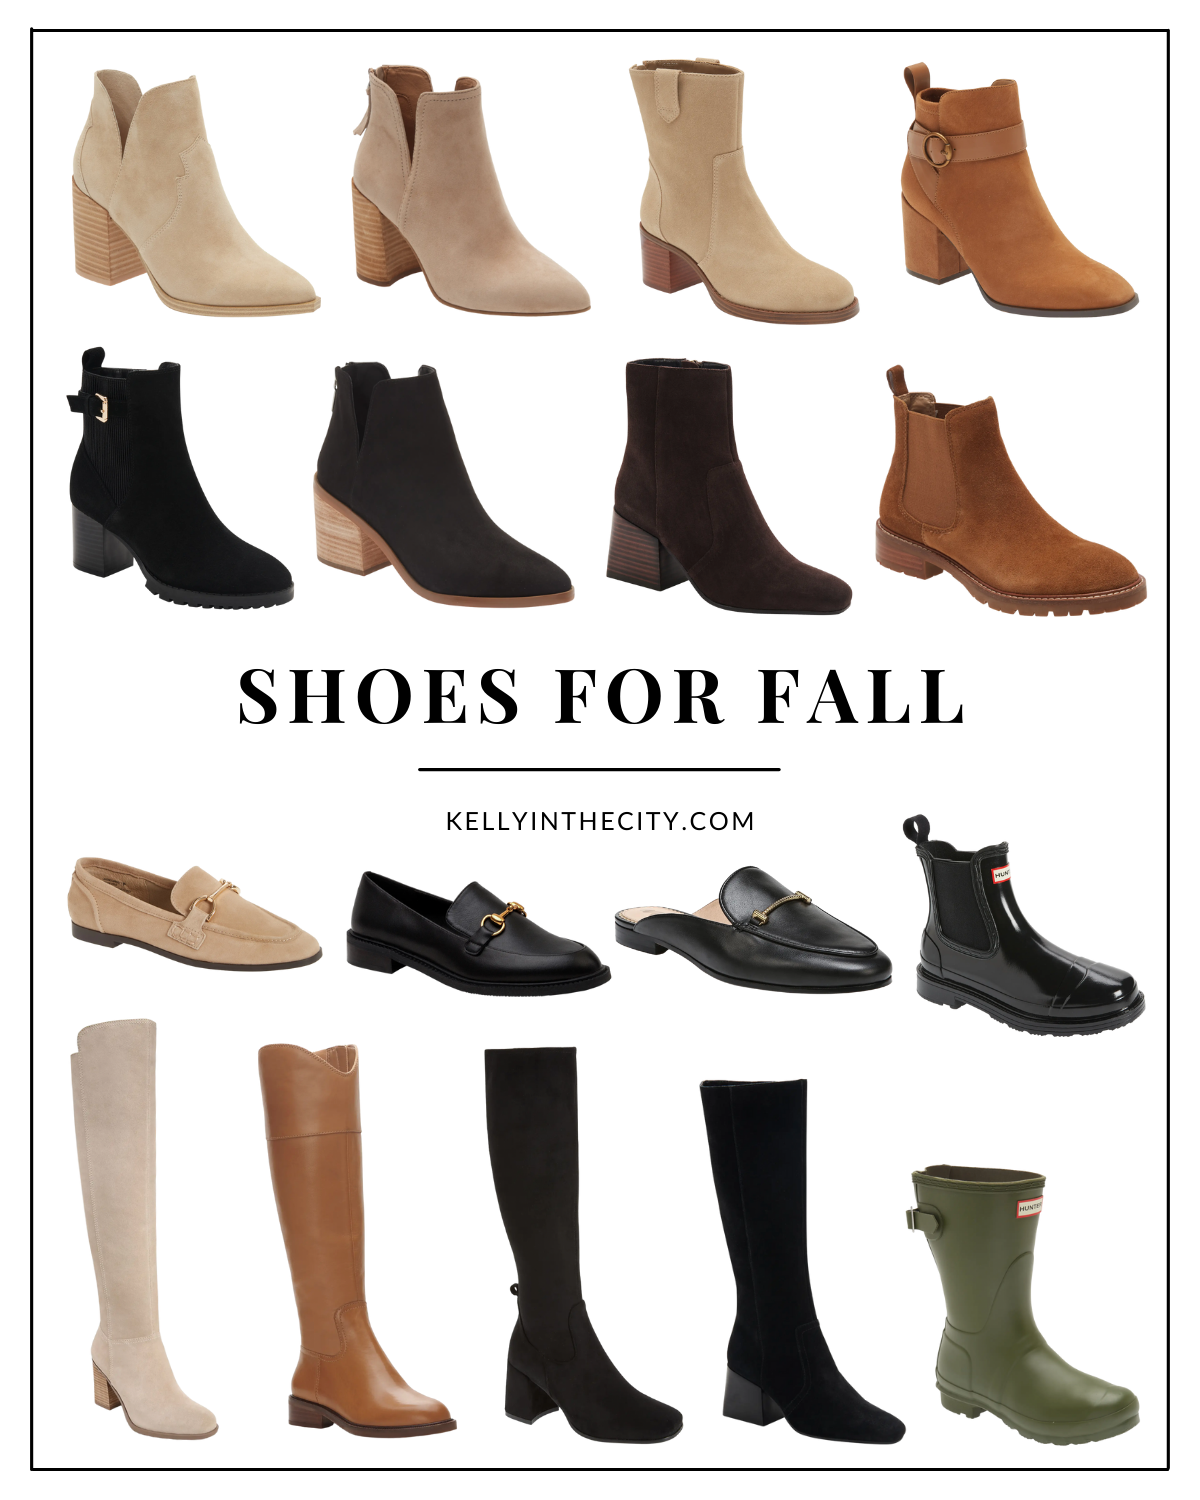 Shoes for Fall